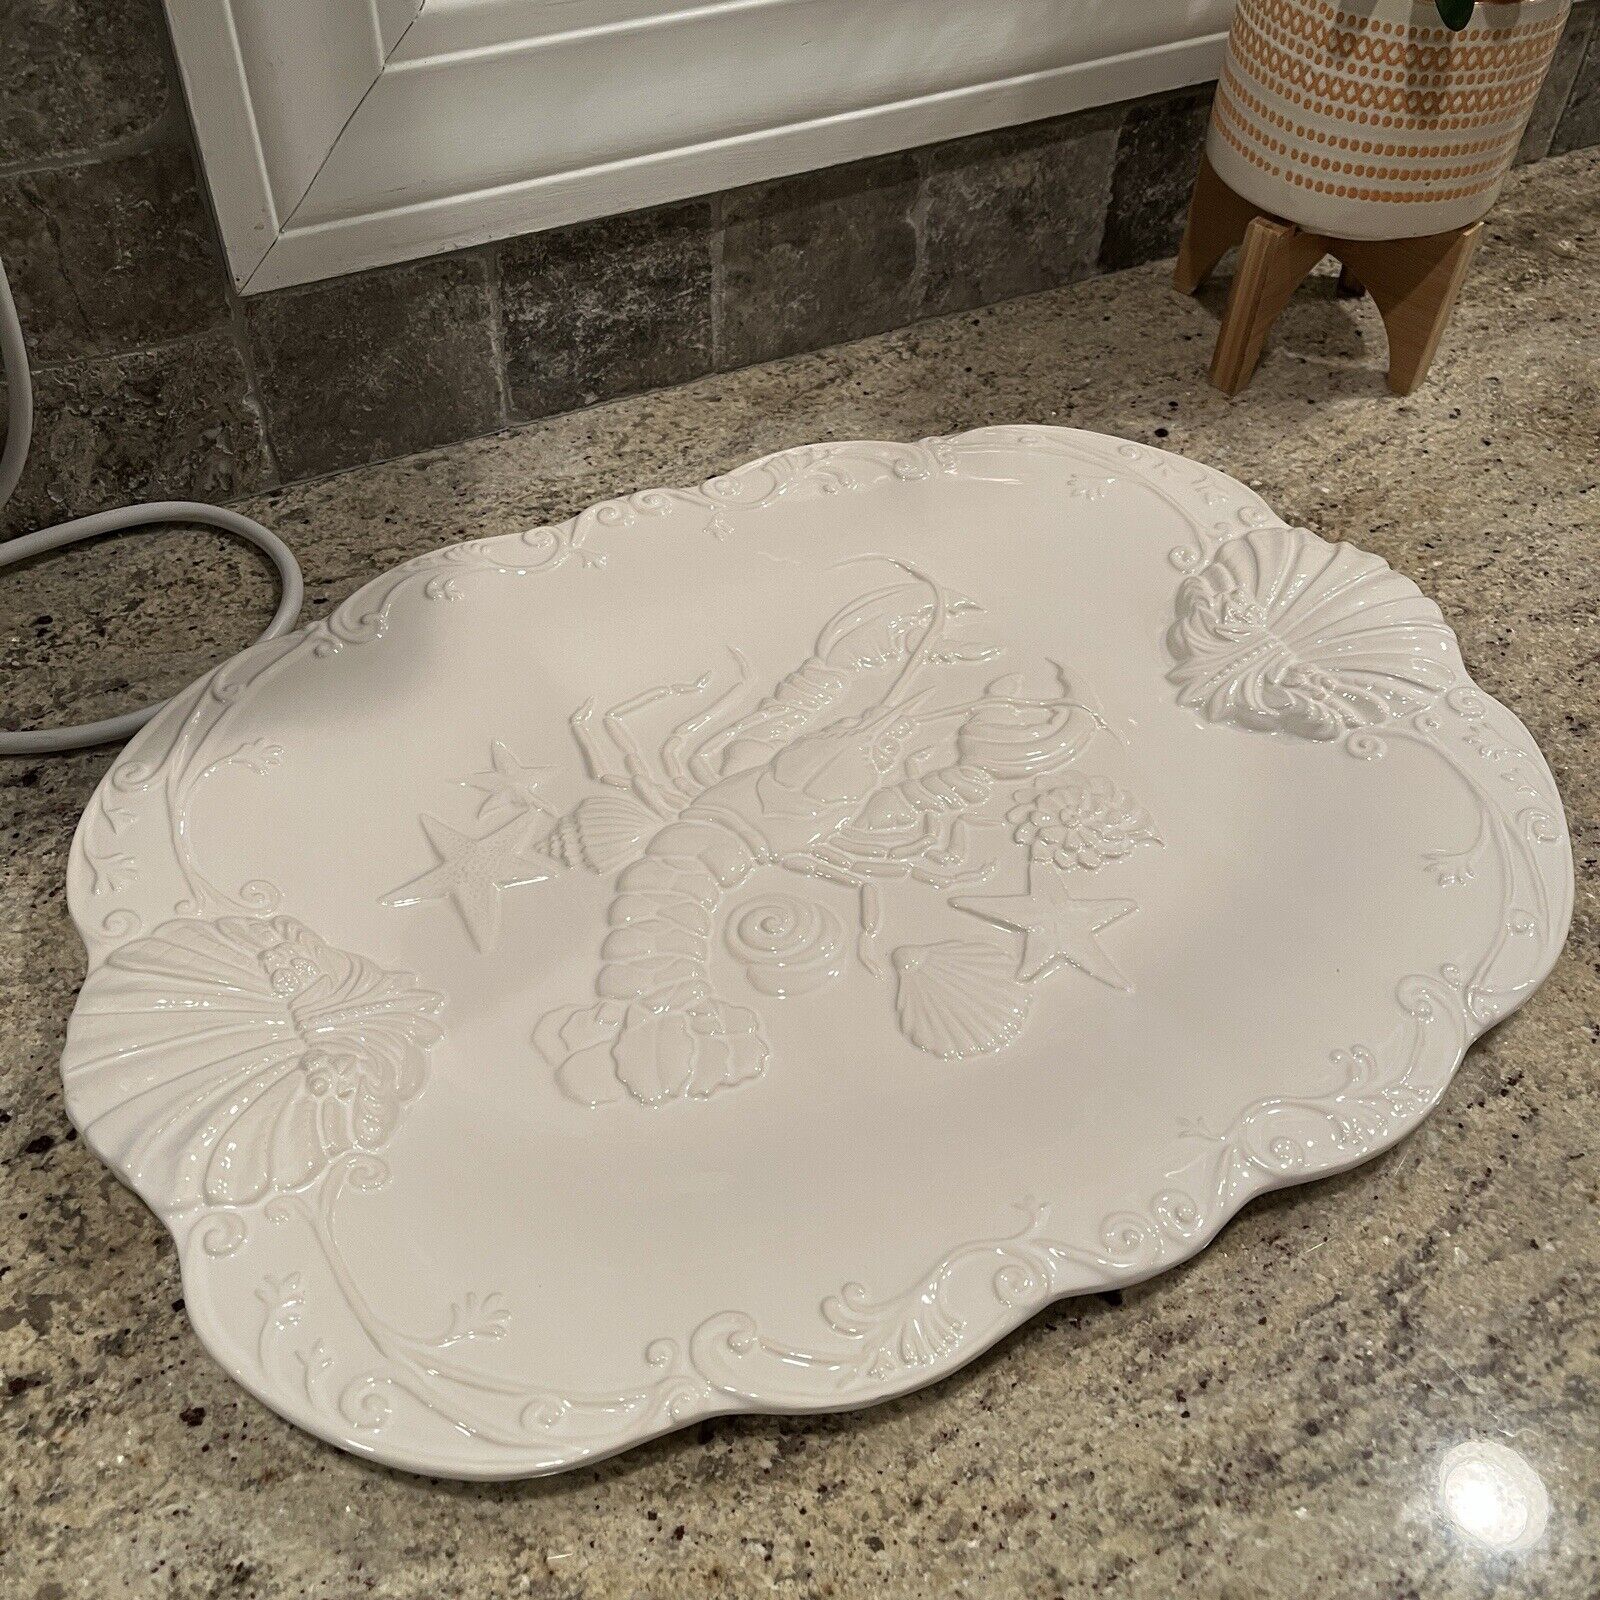 Serving Tray Large White Oval Lobster Seafood Carved Porcelain Made In Portugal